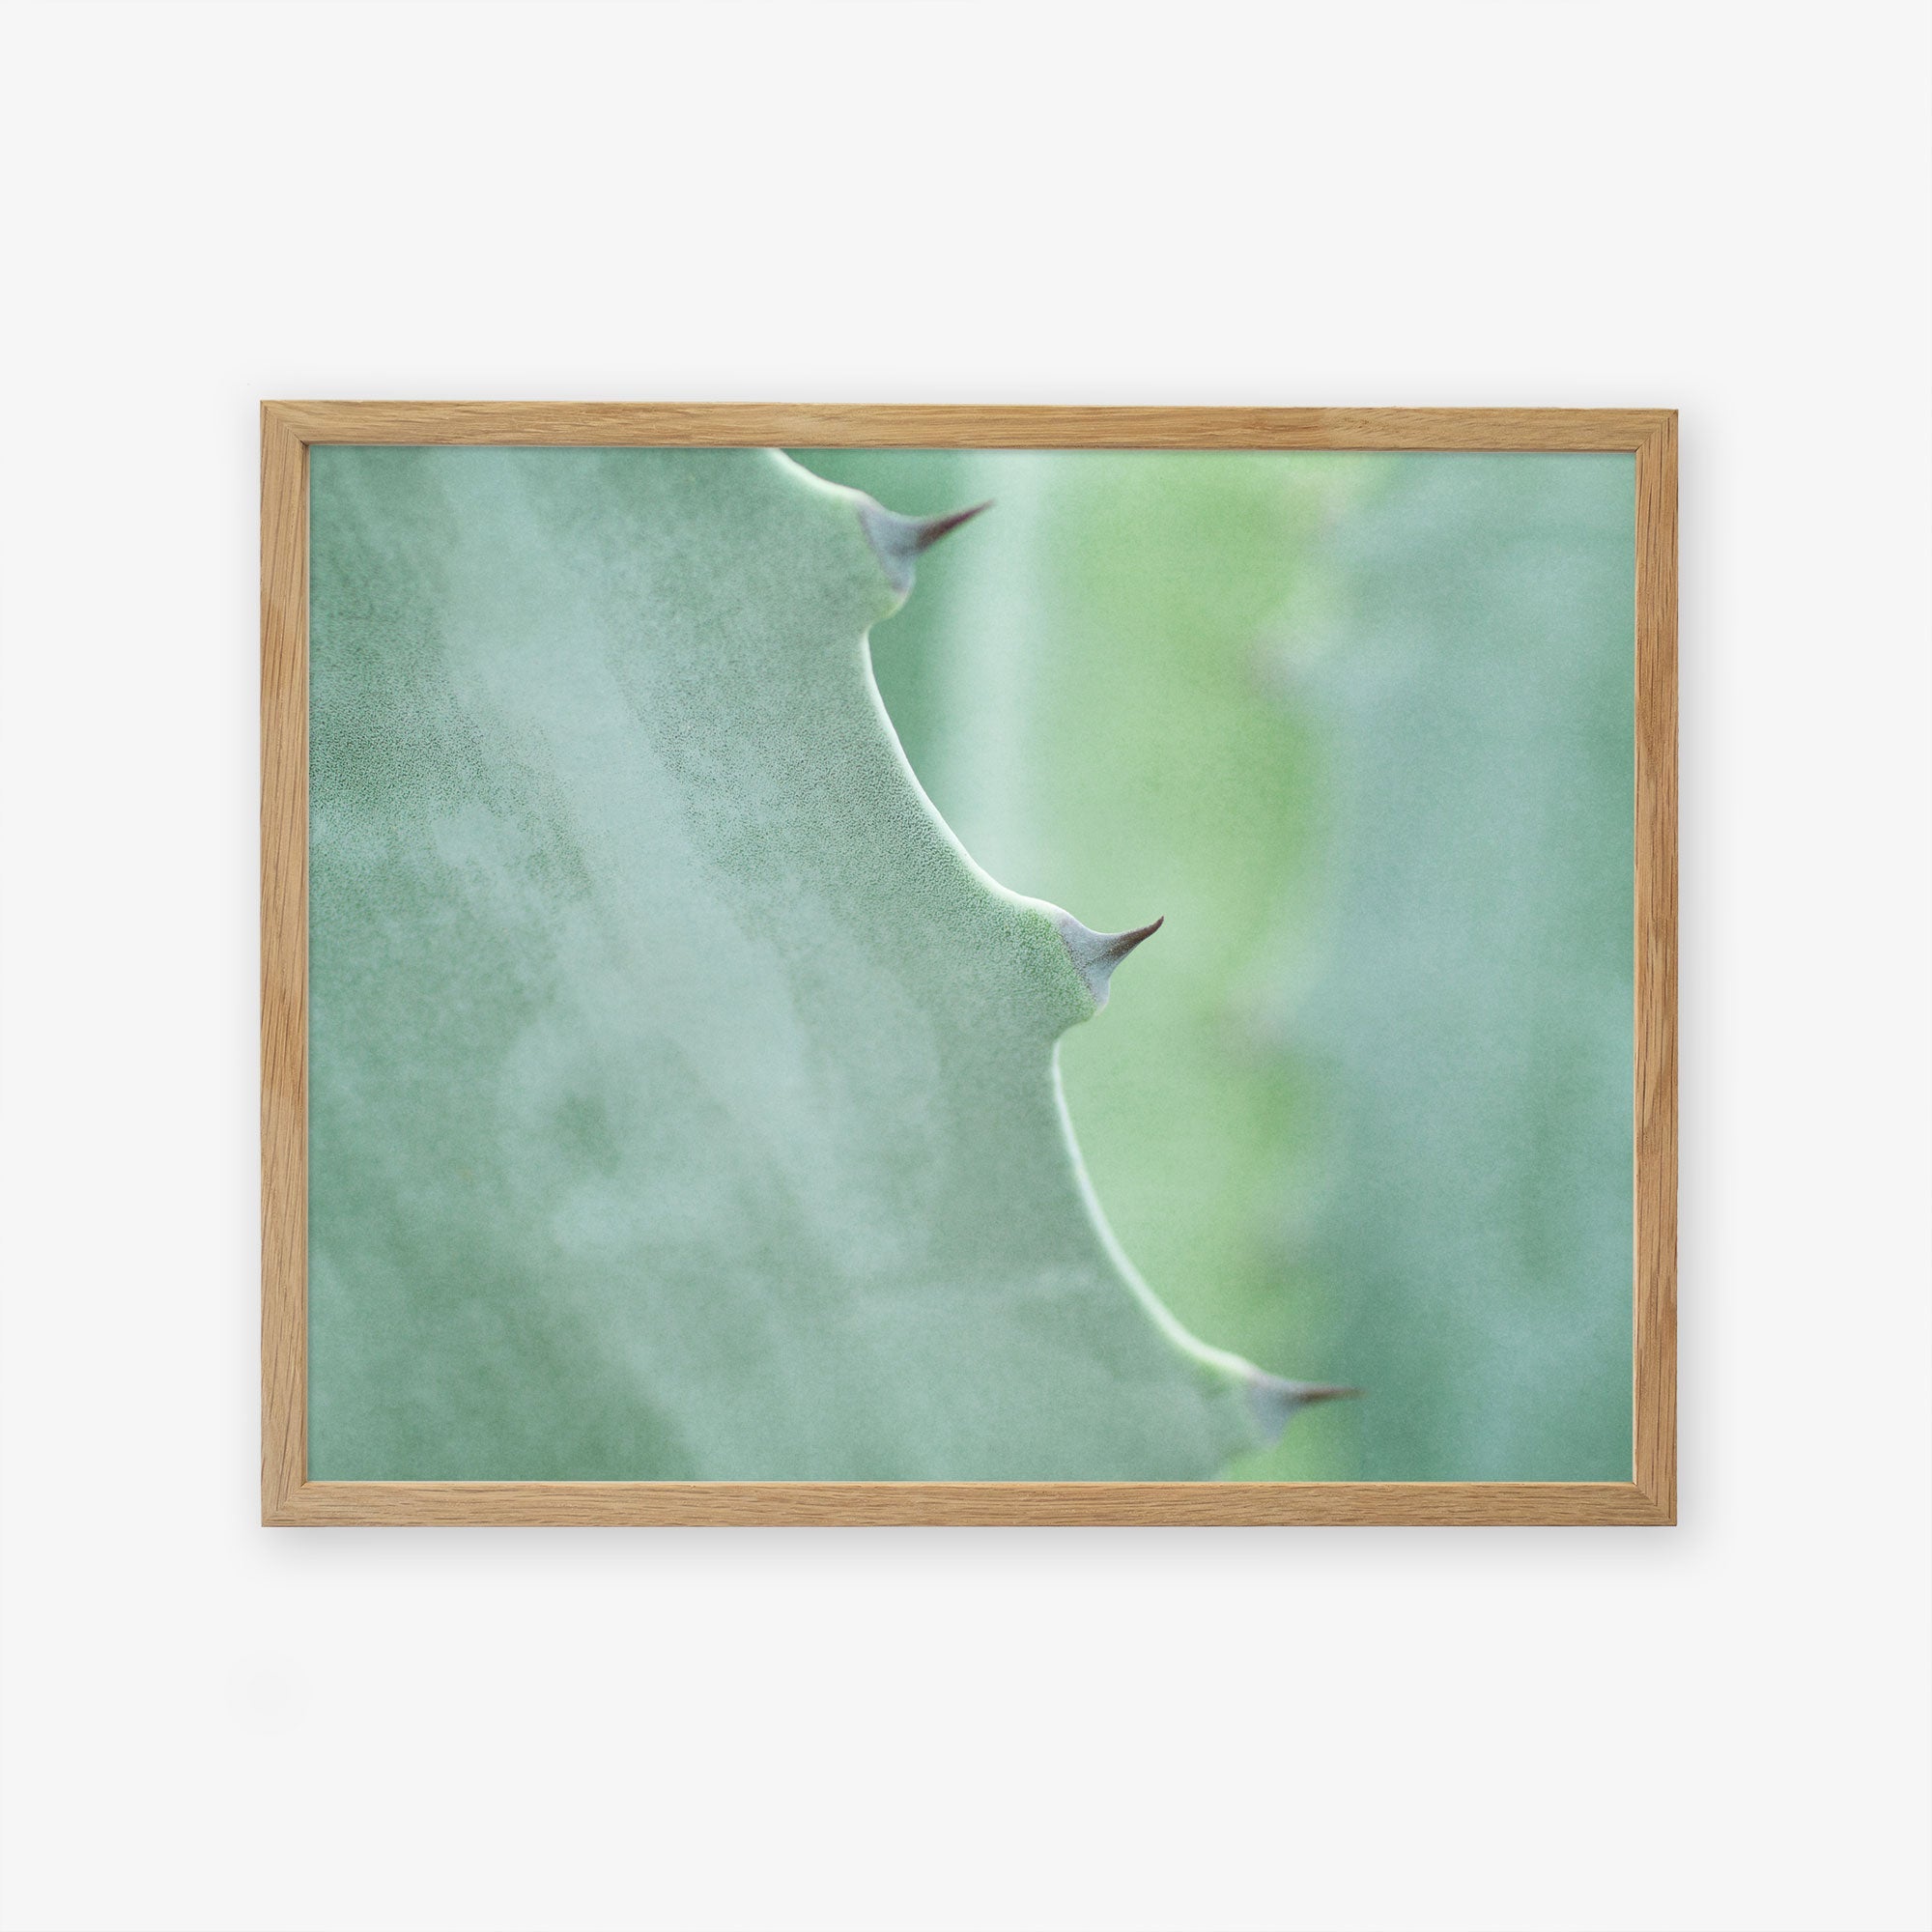 A close-up photo of an Offley Green Mint Green Botanical Print, &#39;Aloe Vera Spikes&#39;, displayed on archival photographic paper against a plain background. The focus is on the texture and natural details of the plant.